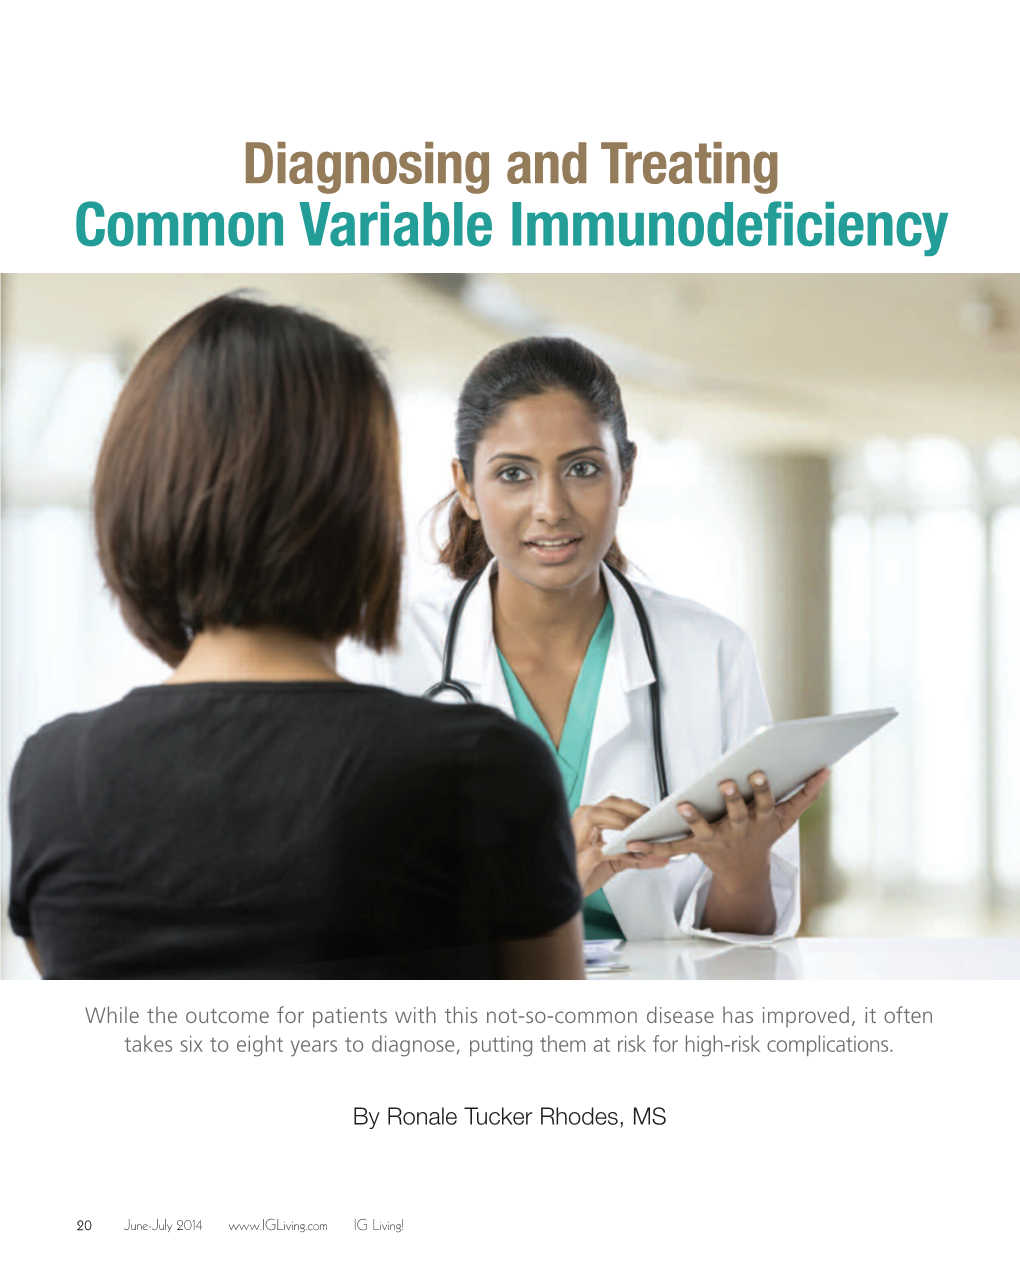 Diagnosing and Treating Common Variable Immunodeficiency